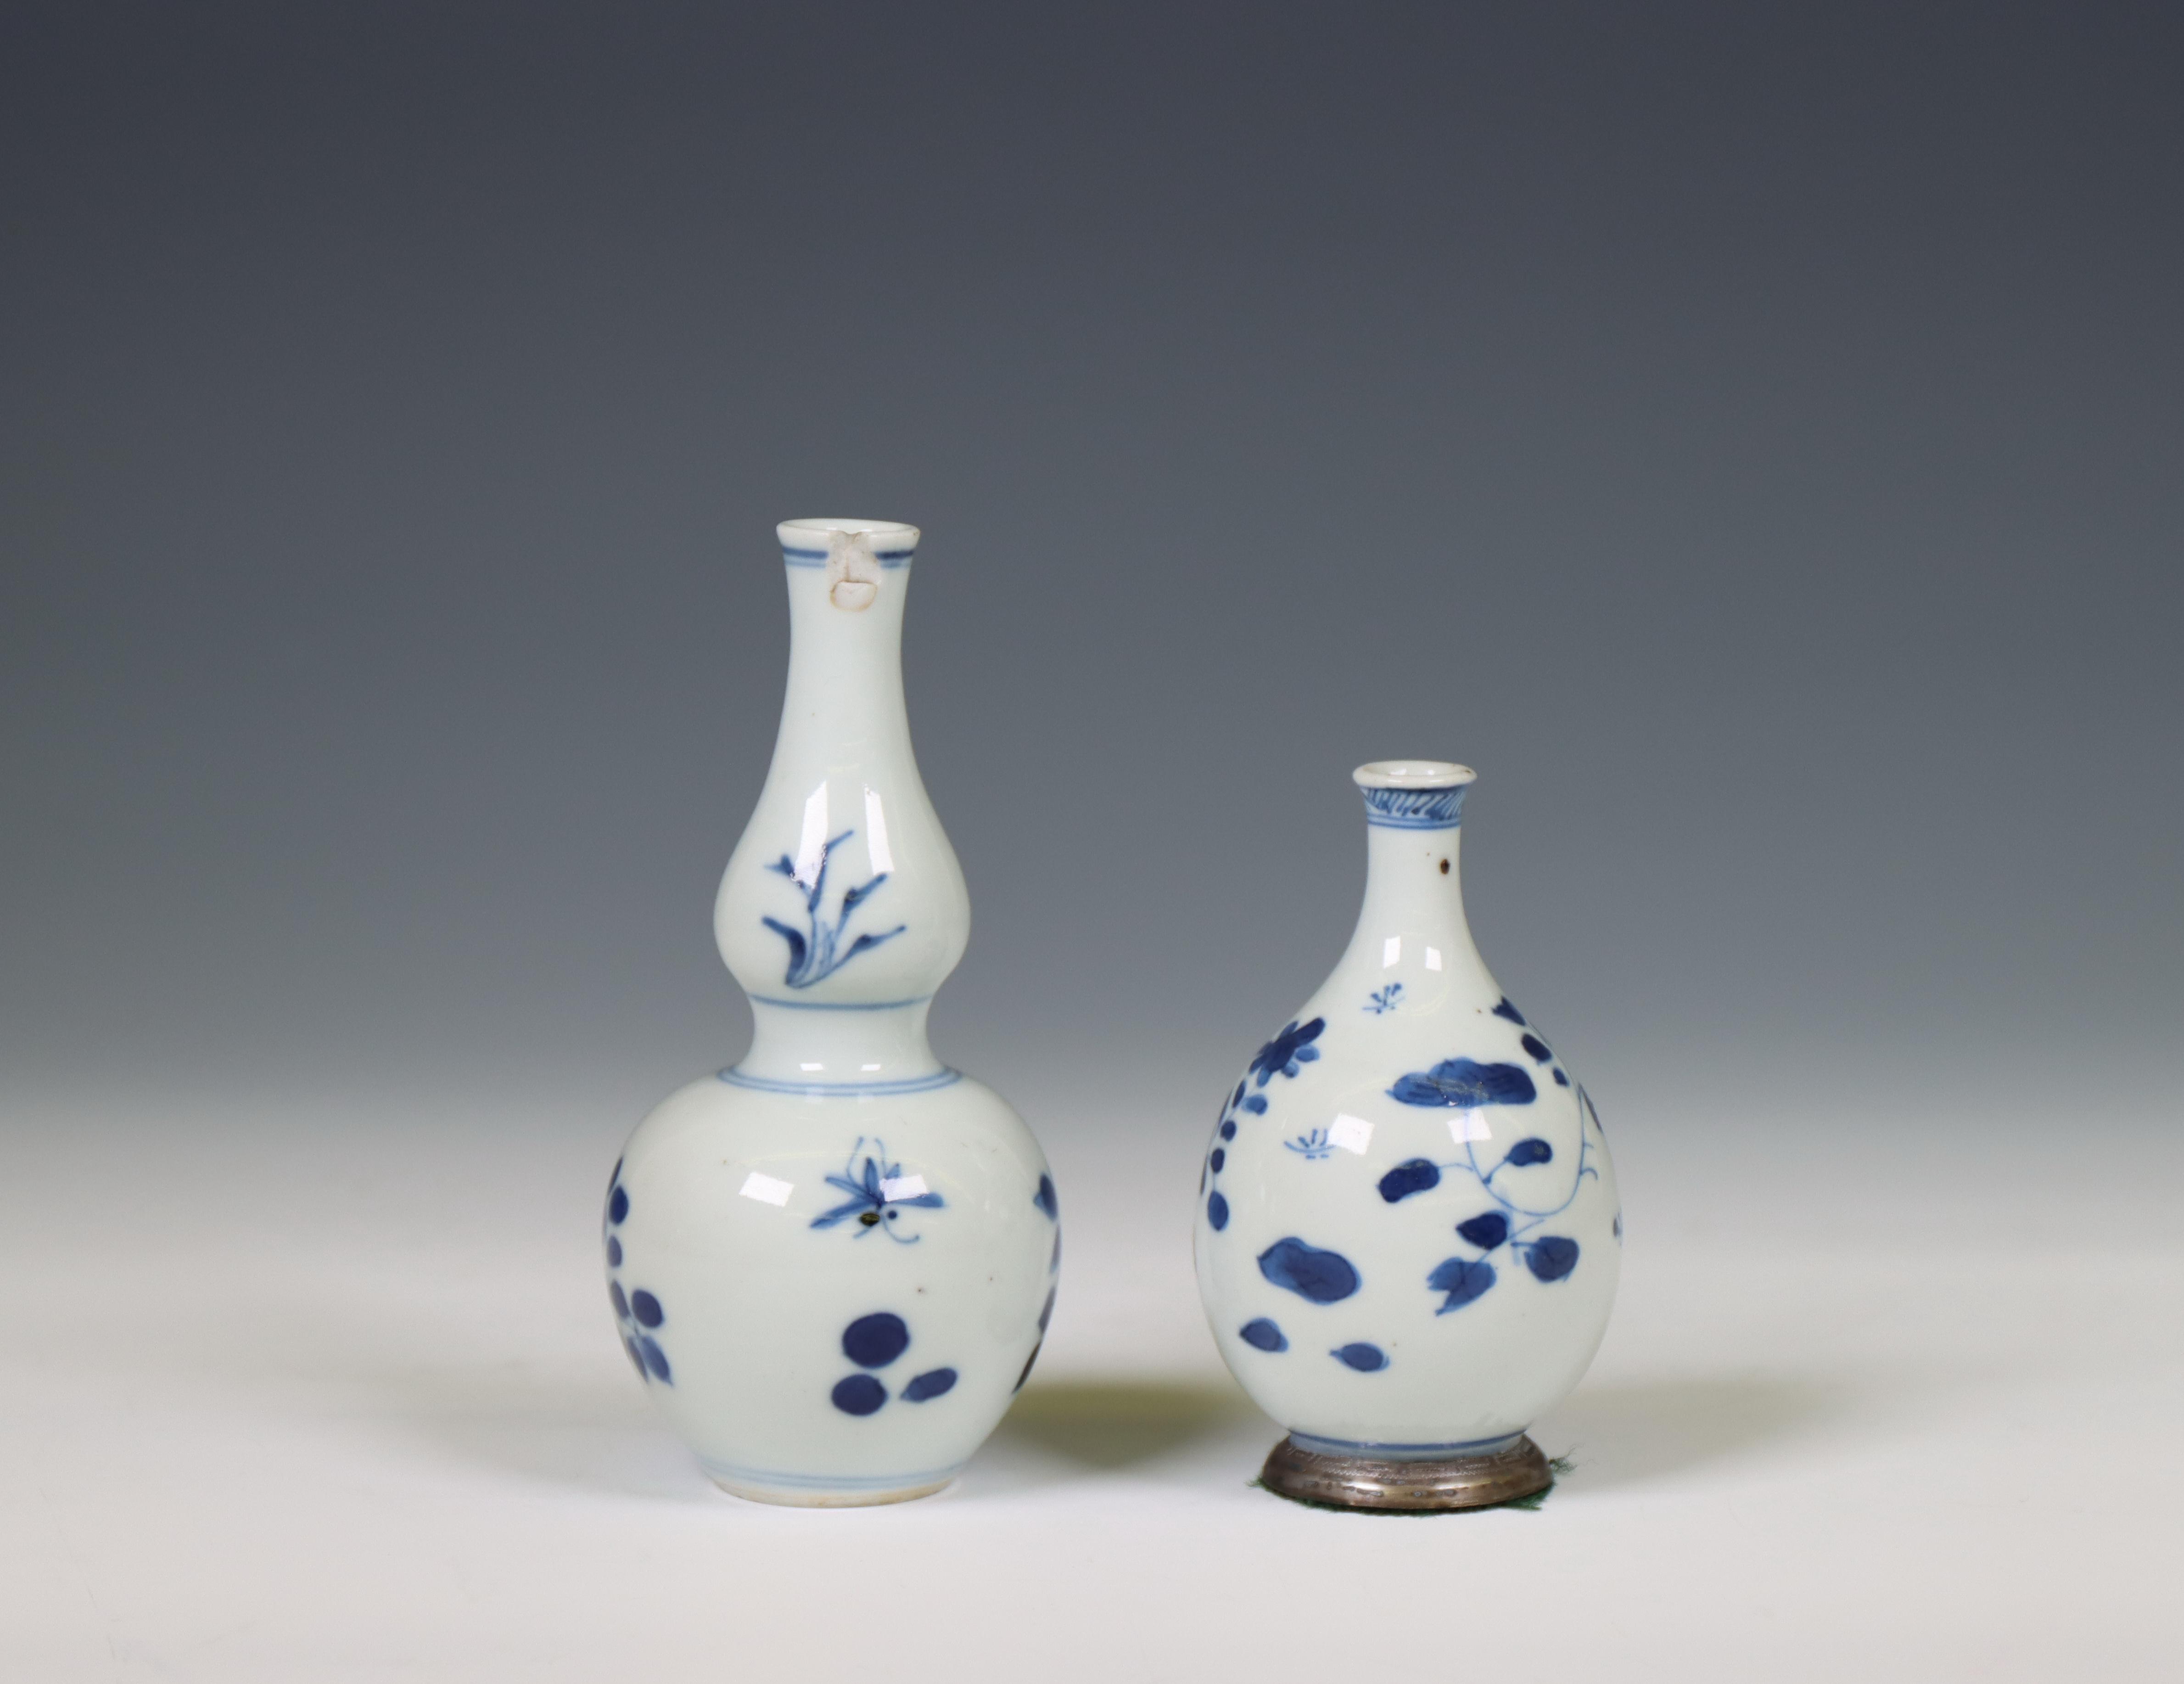 China, two blue and white porcelain vases, Kangxi period (1662-1722), - Image 4 of 4